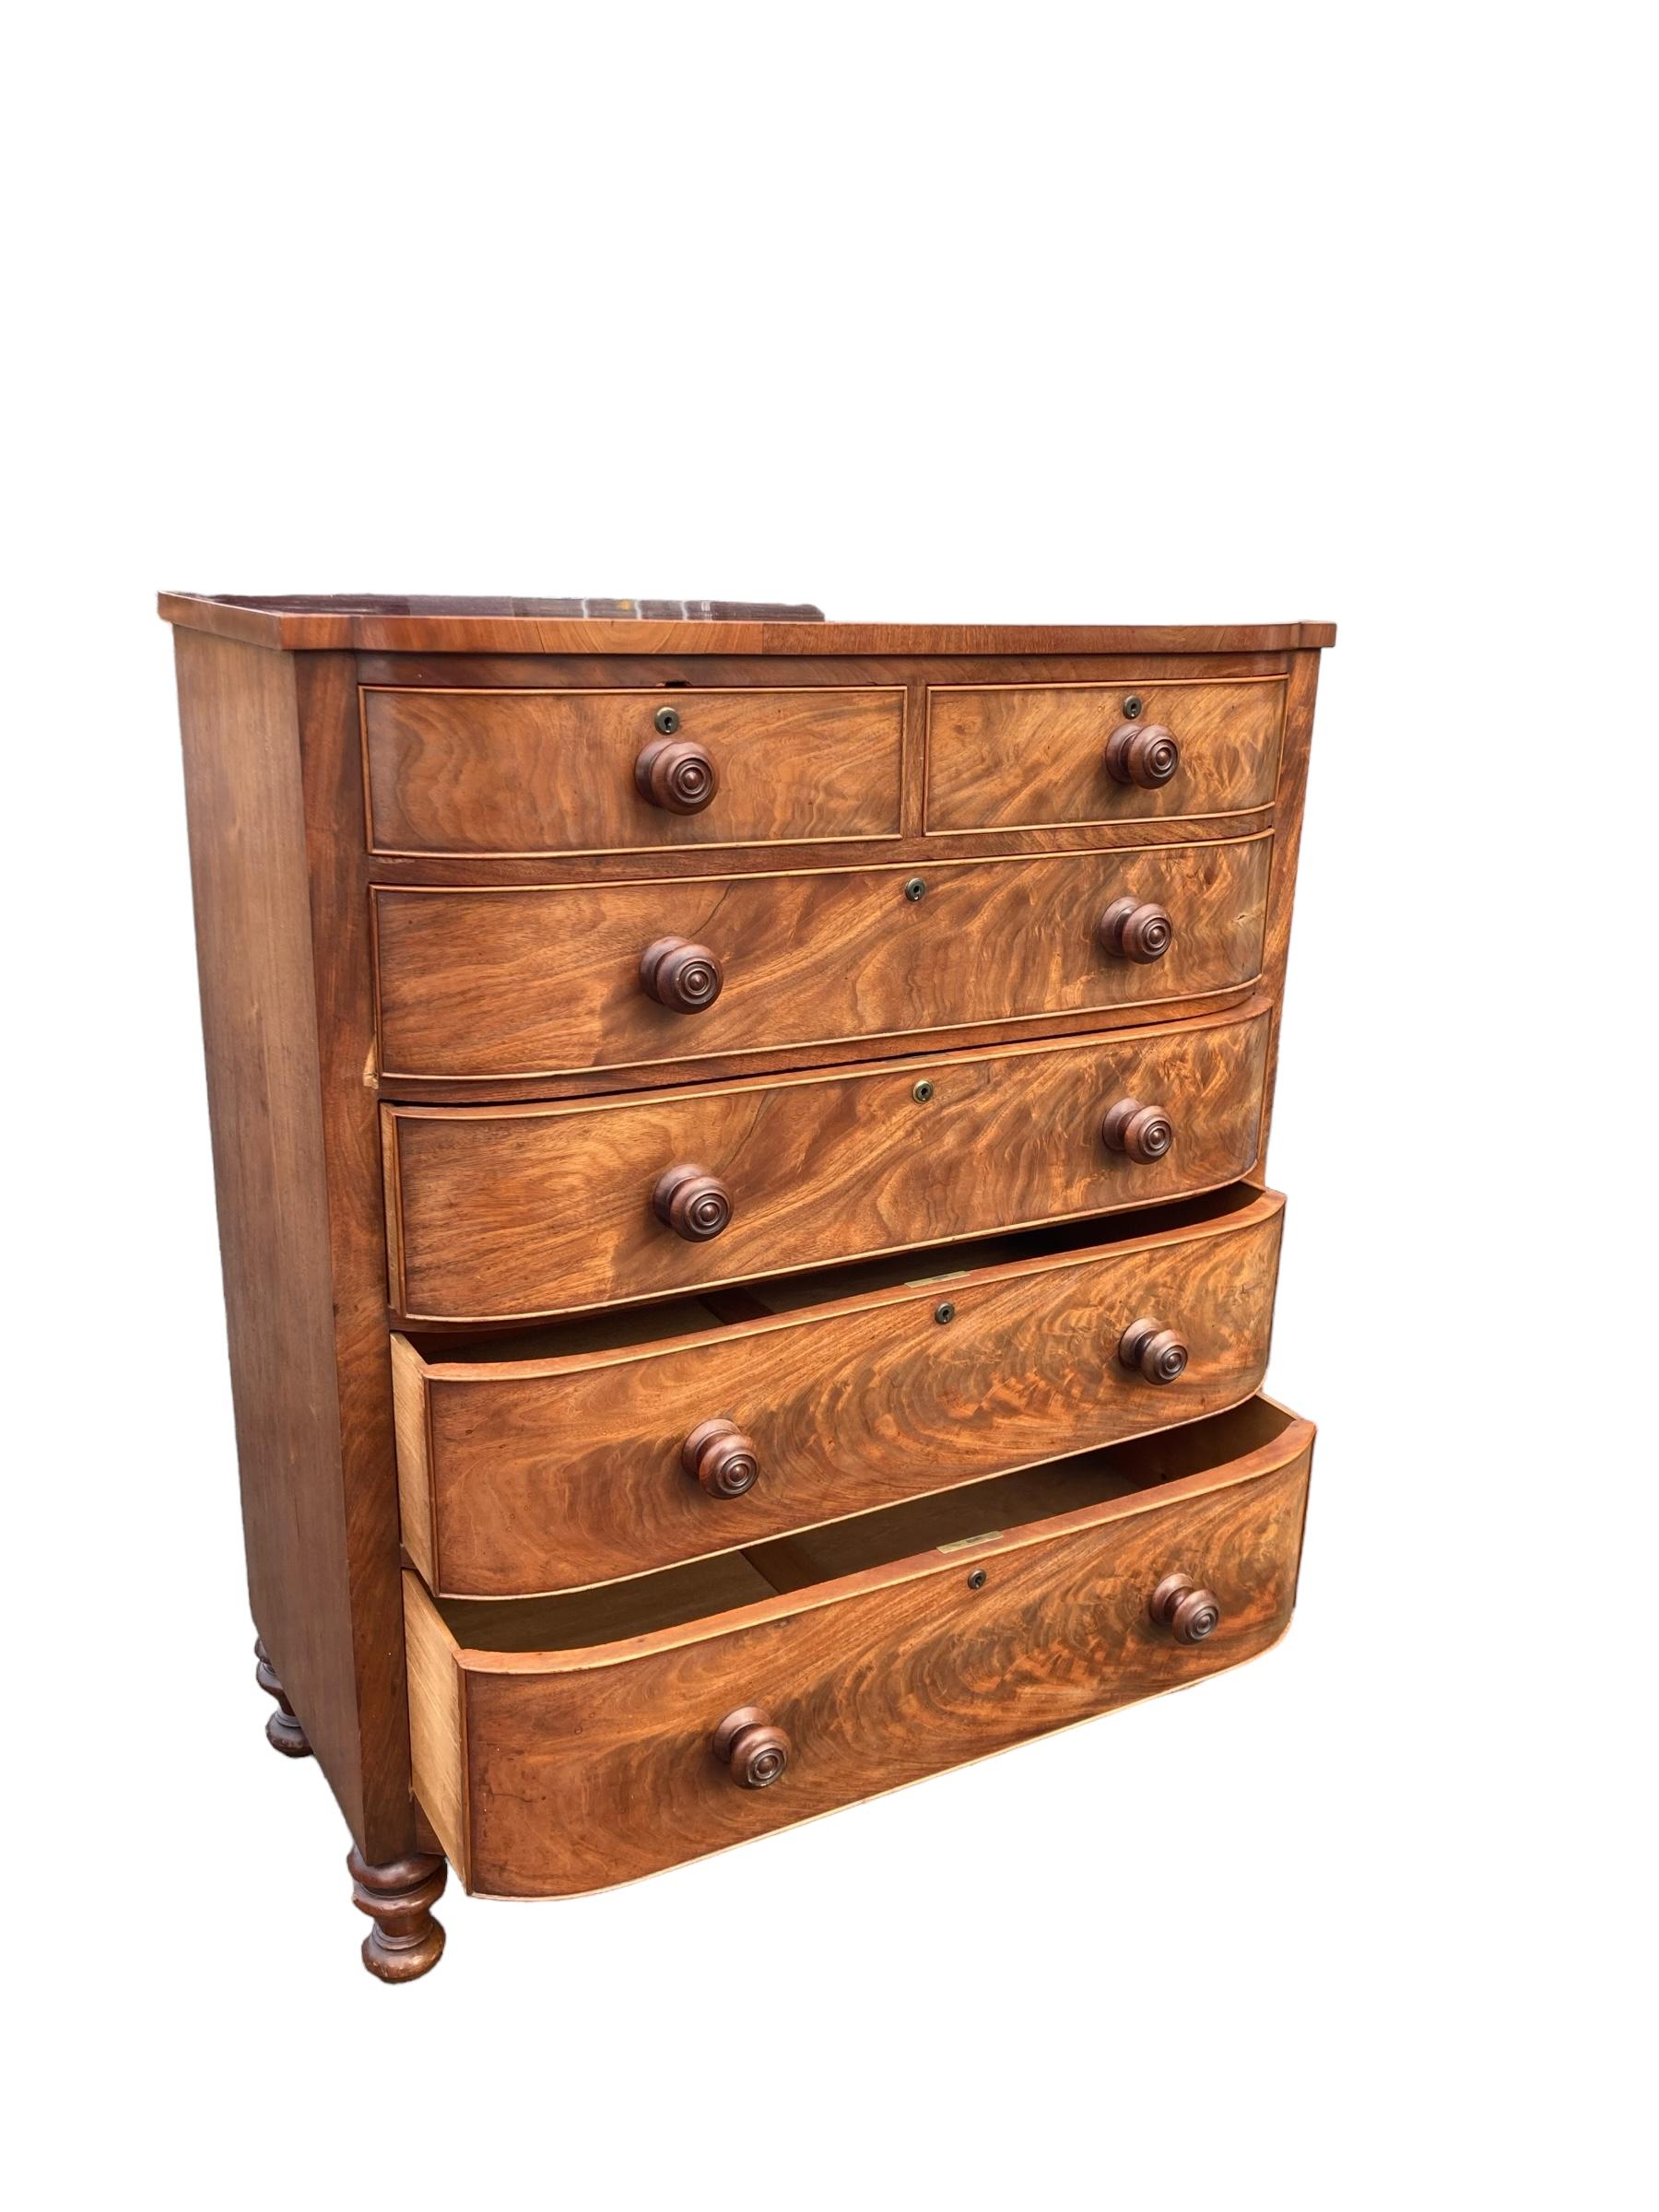 Large Victorian Two over Four Bow fronted Mahohany Chest Graduated drawers. Standing on turned legs, original handles.
This exquisite antique chest of drawers exudes elegance and charm, making it a perfect addition to any home decor. Crafted with